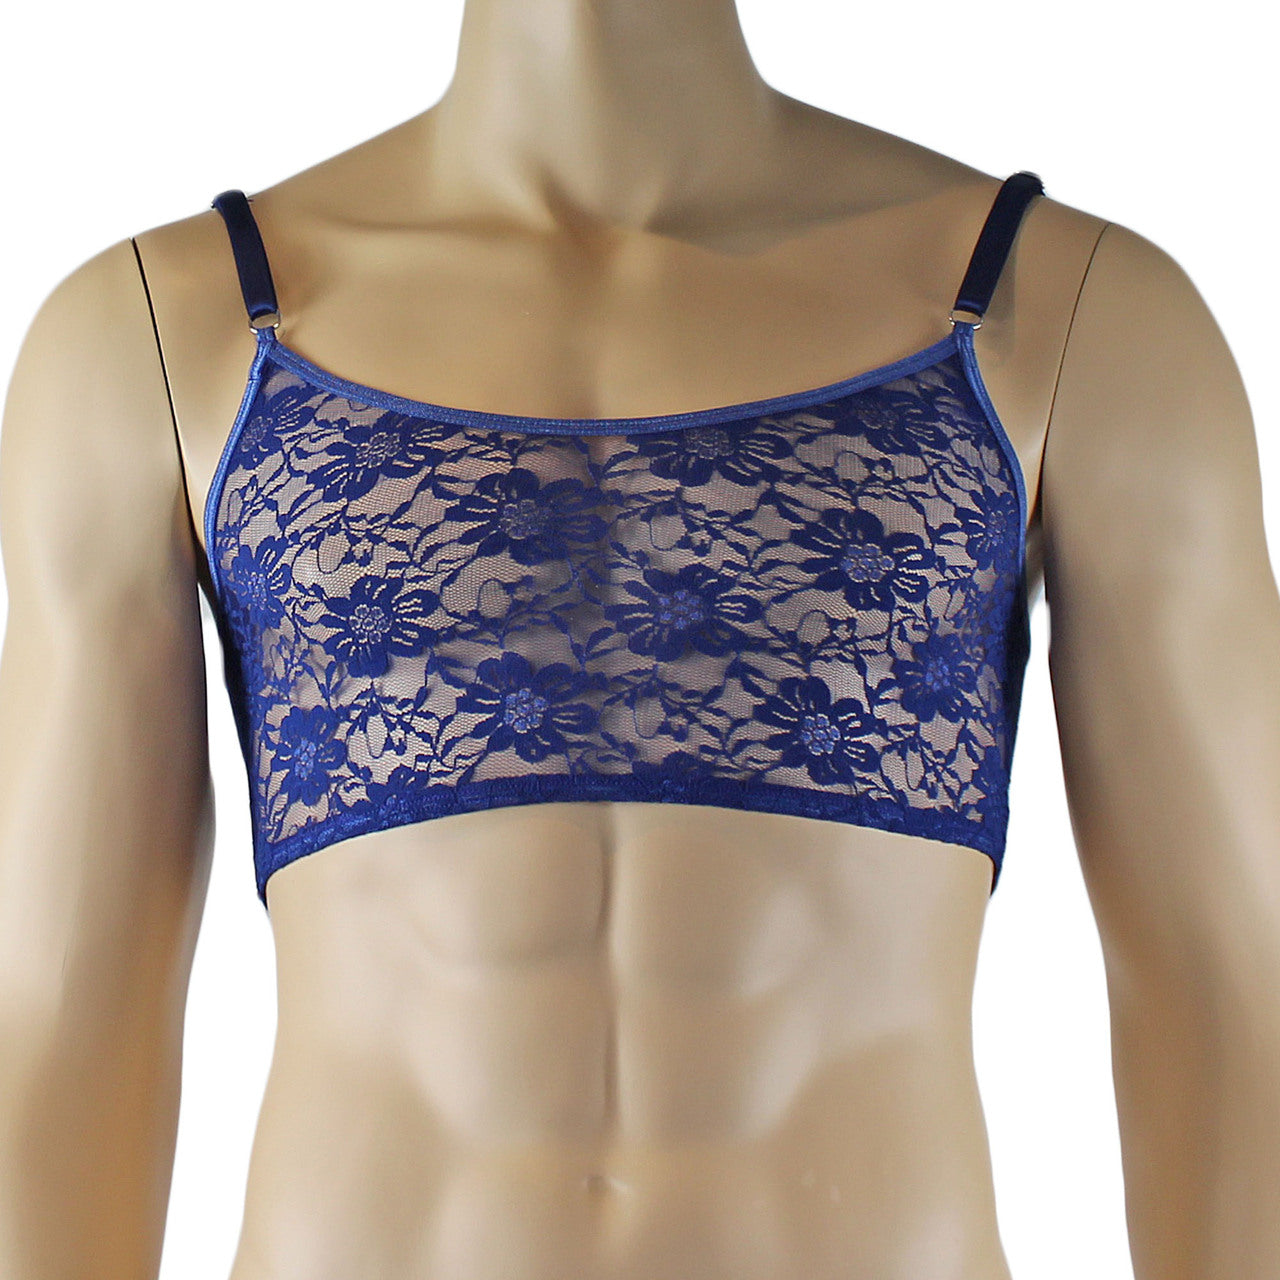 Mens Lace Crop Bra Top Camisole and Male Lingerie Panty Briefs (navy plus other colours)